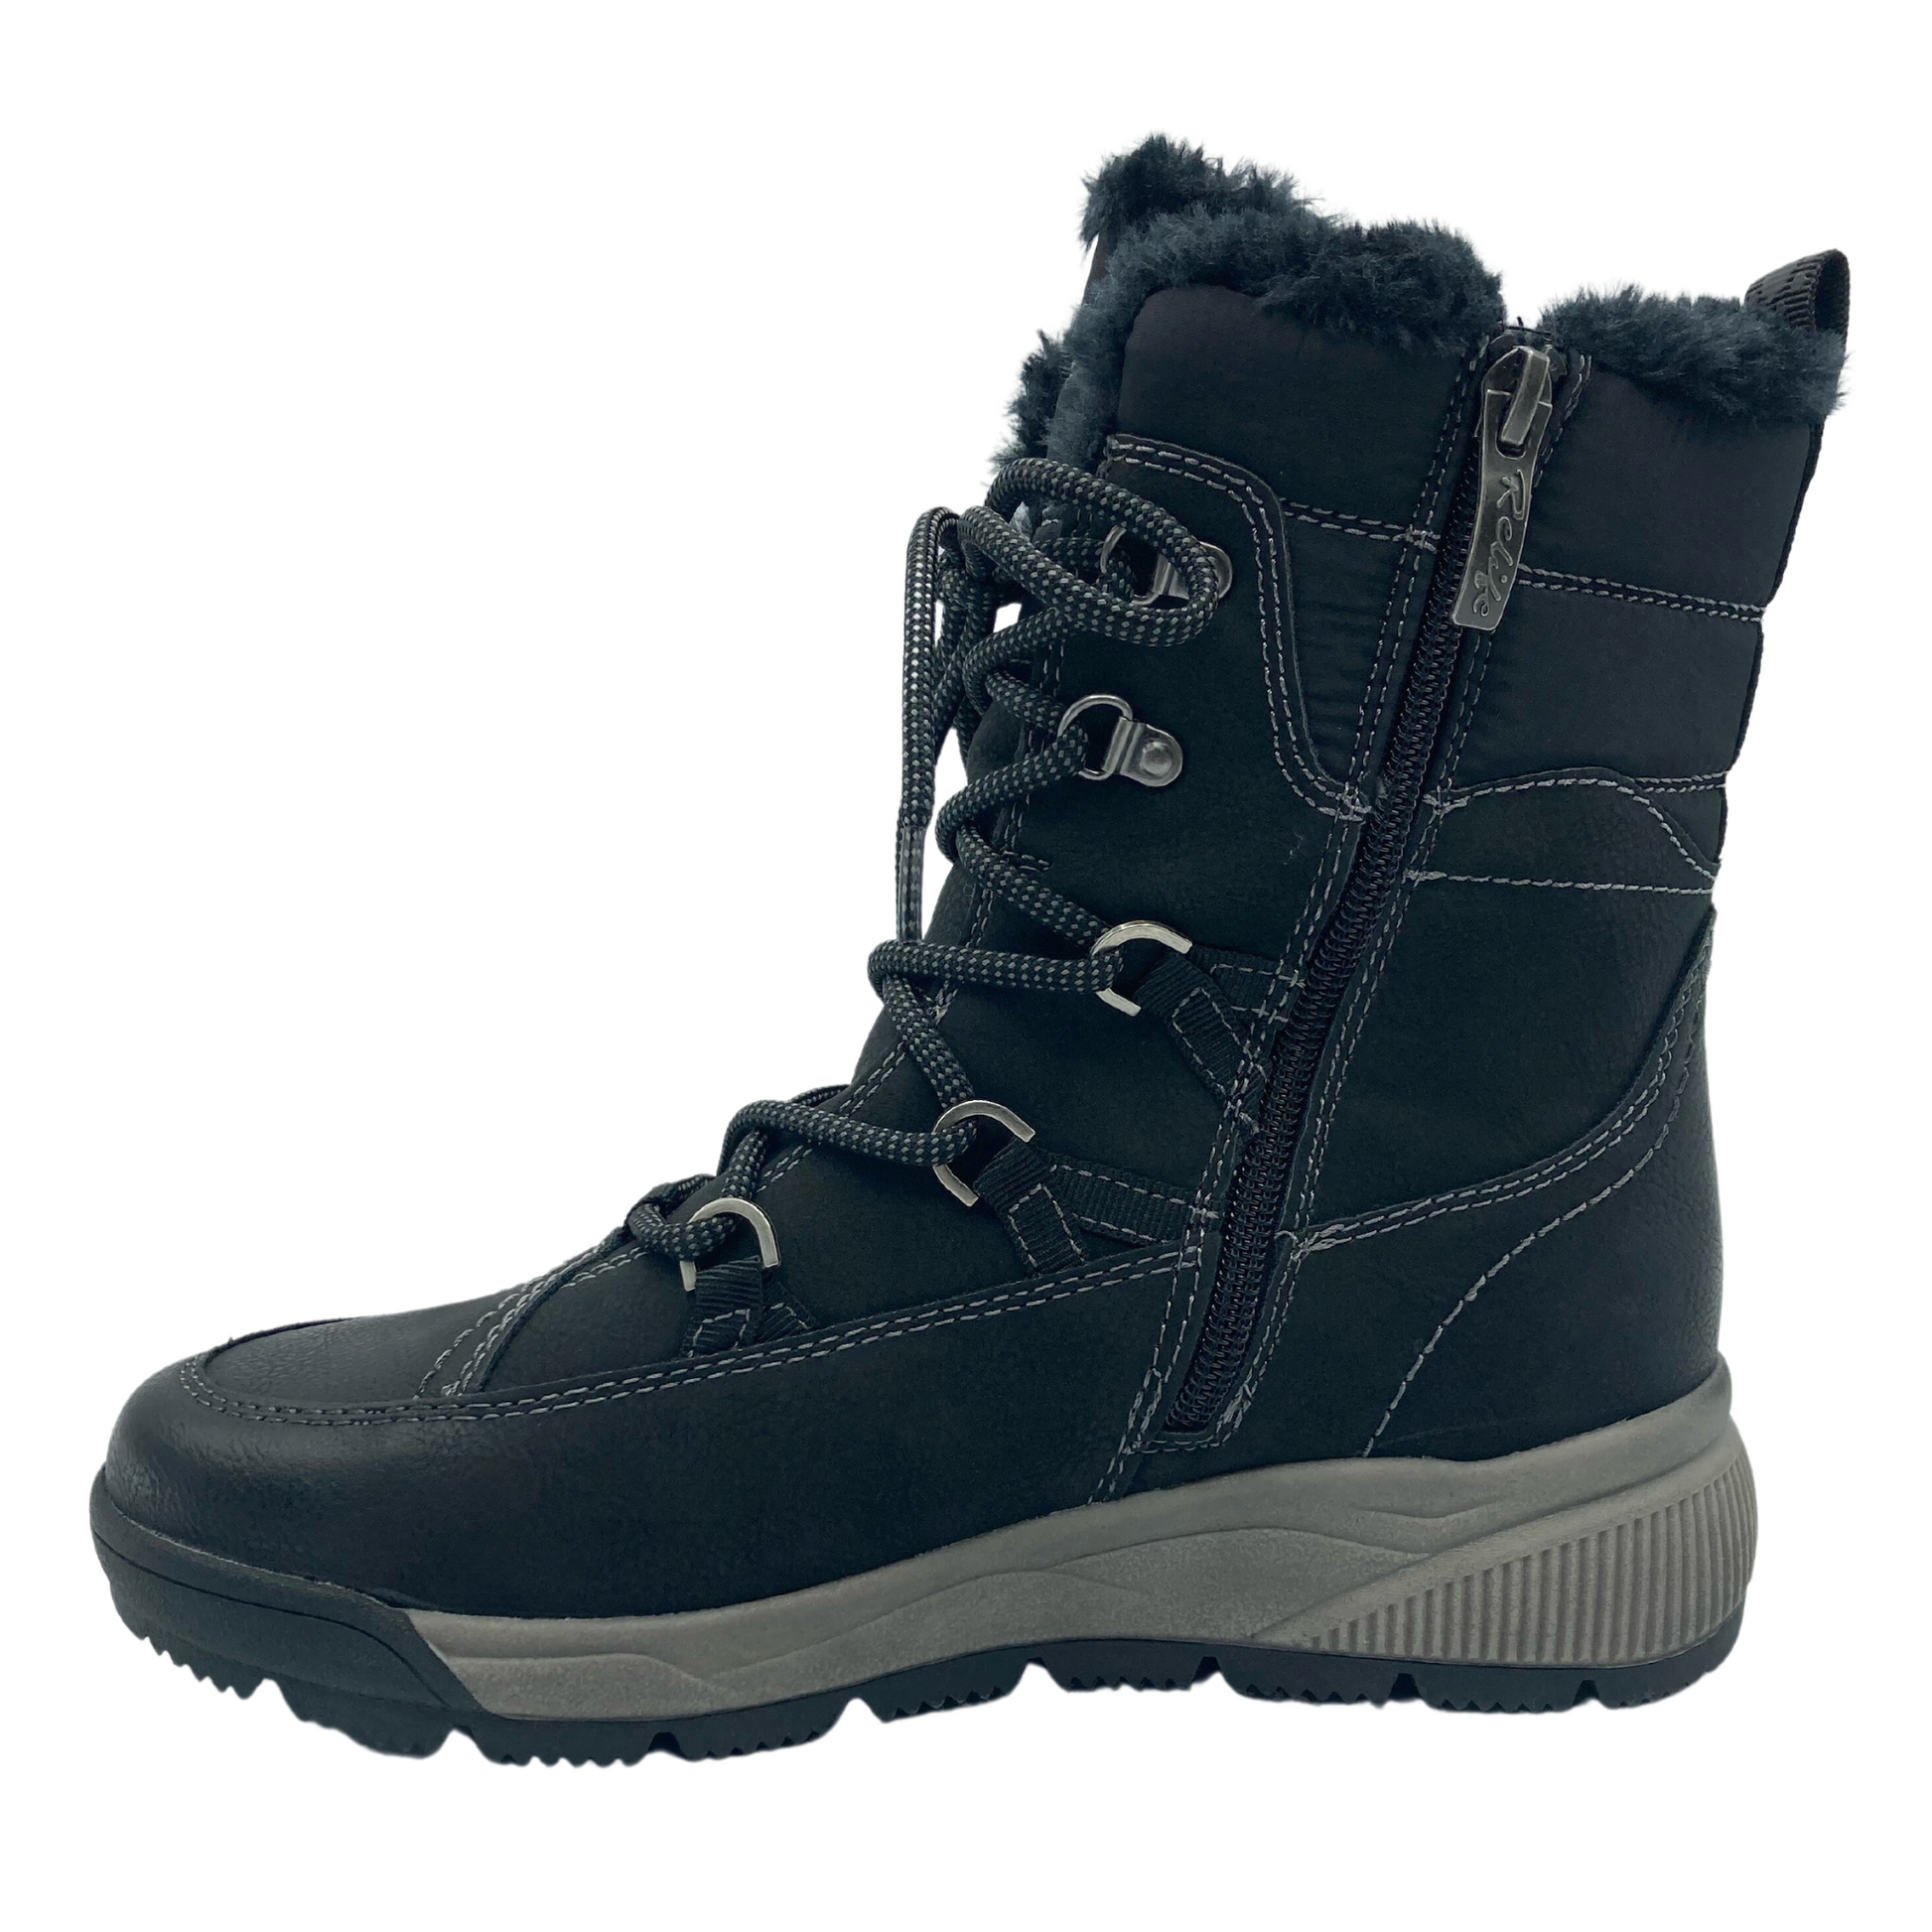 Left facing view of short winter boot with side zipper closure, laces and thick rubber sole